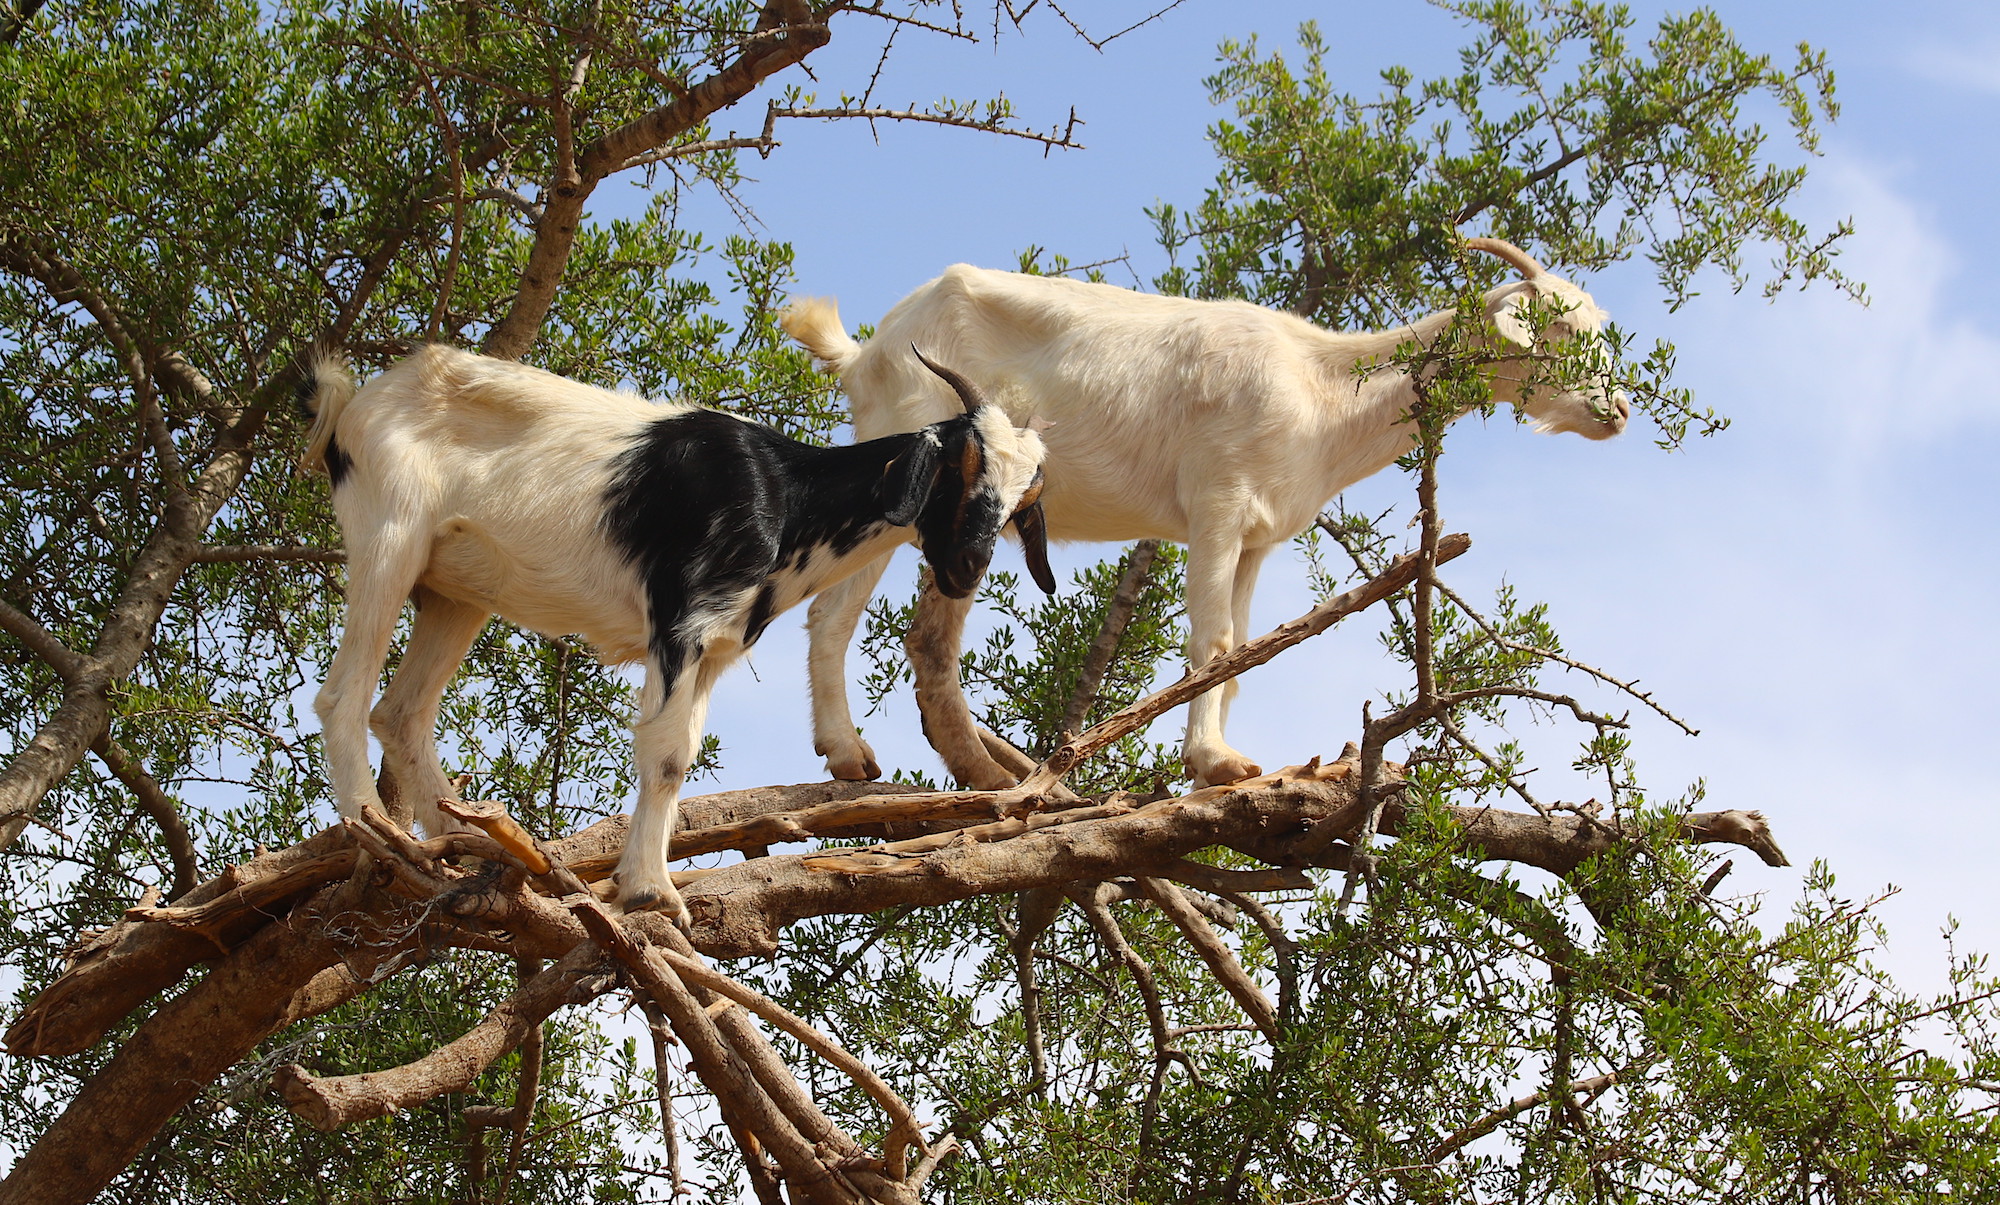 The climbing goats of Morocco